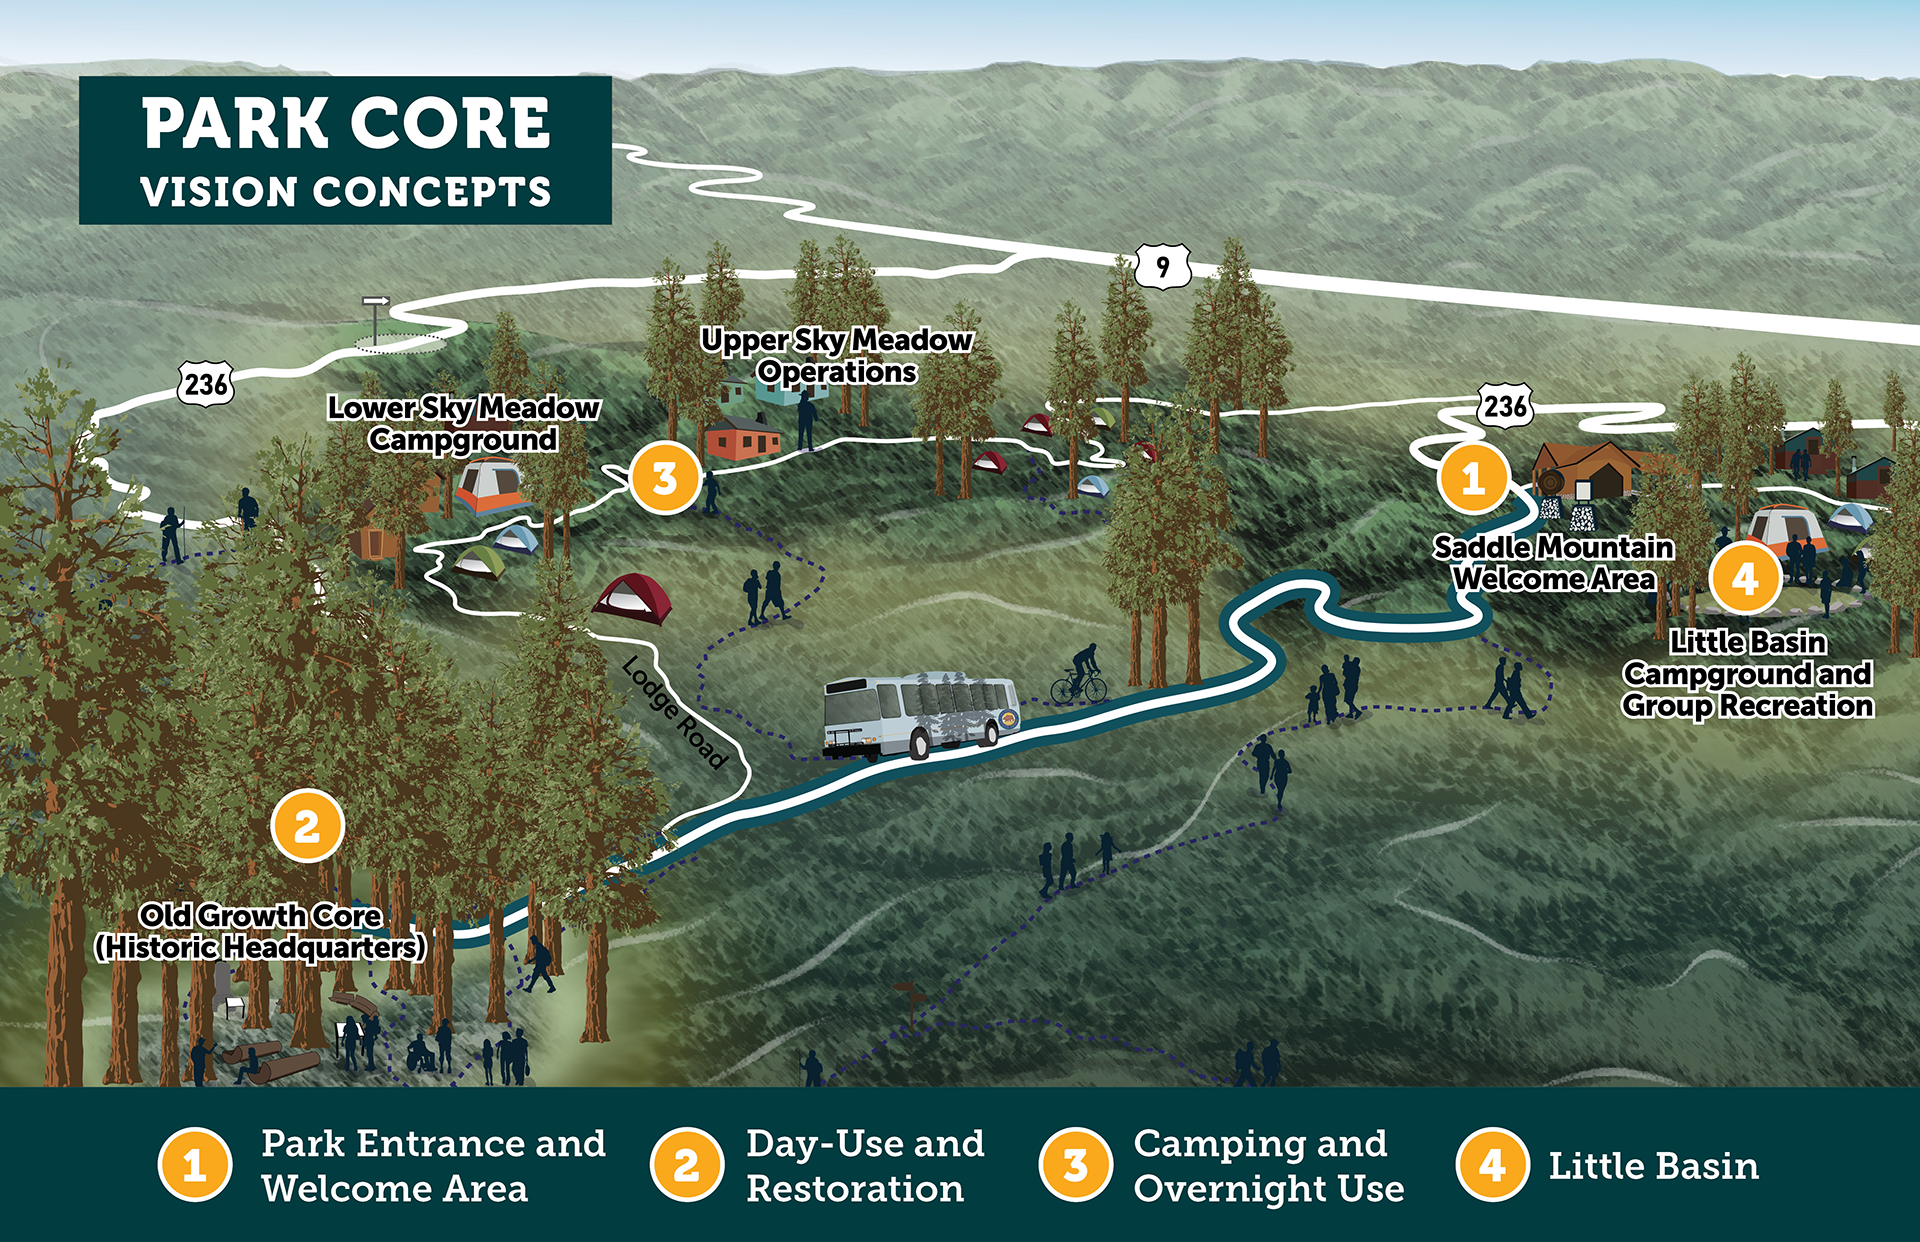 A cartoon illustration in birds eye view showing four key areas in the park core. First, Saddle Mountain as the new park entrance and welcome area. Second, the historic headquarters in the old growth core as an area for day-use facilities and restoration. Third, camping and overnight use located in Sky Meadow, outside of the old growth area. Finally, Little Basin as a potential site for camping and group recreation.